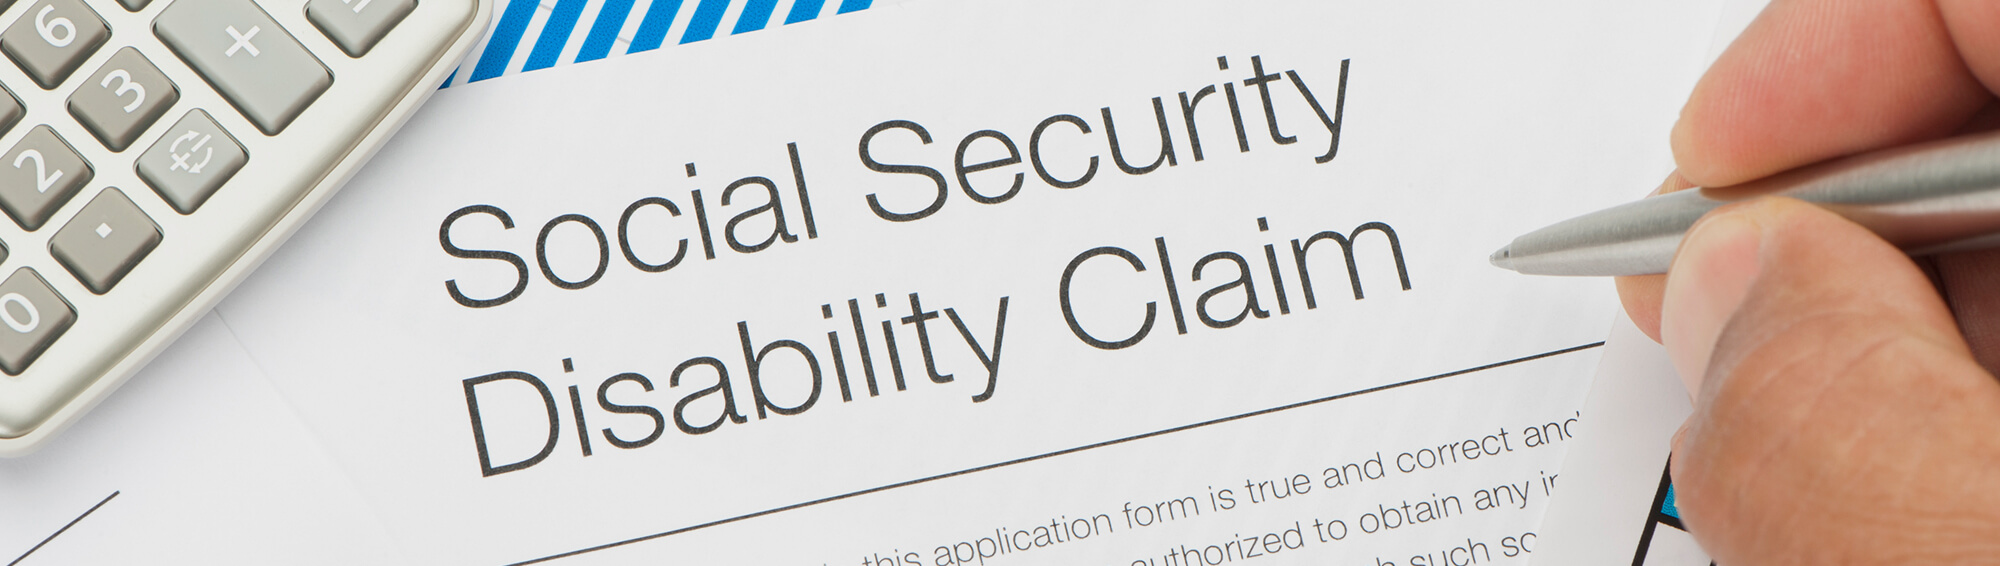 How to Secure Social Security Disability Benefits